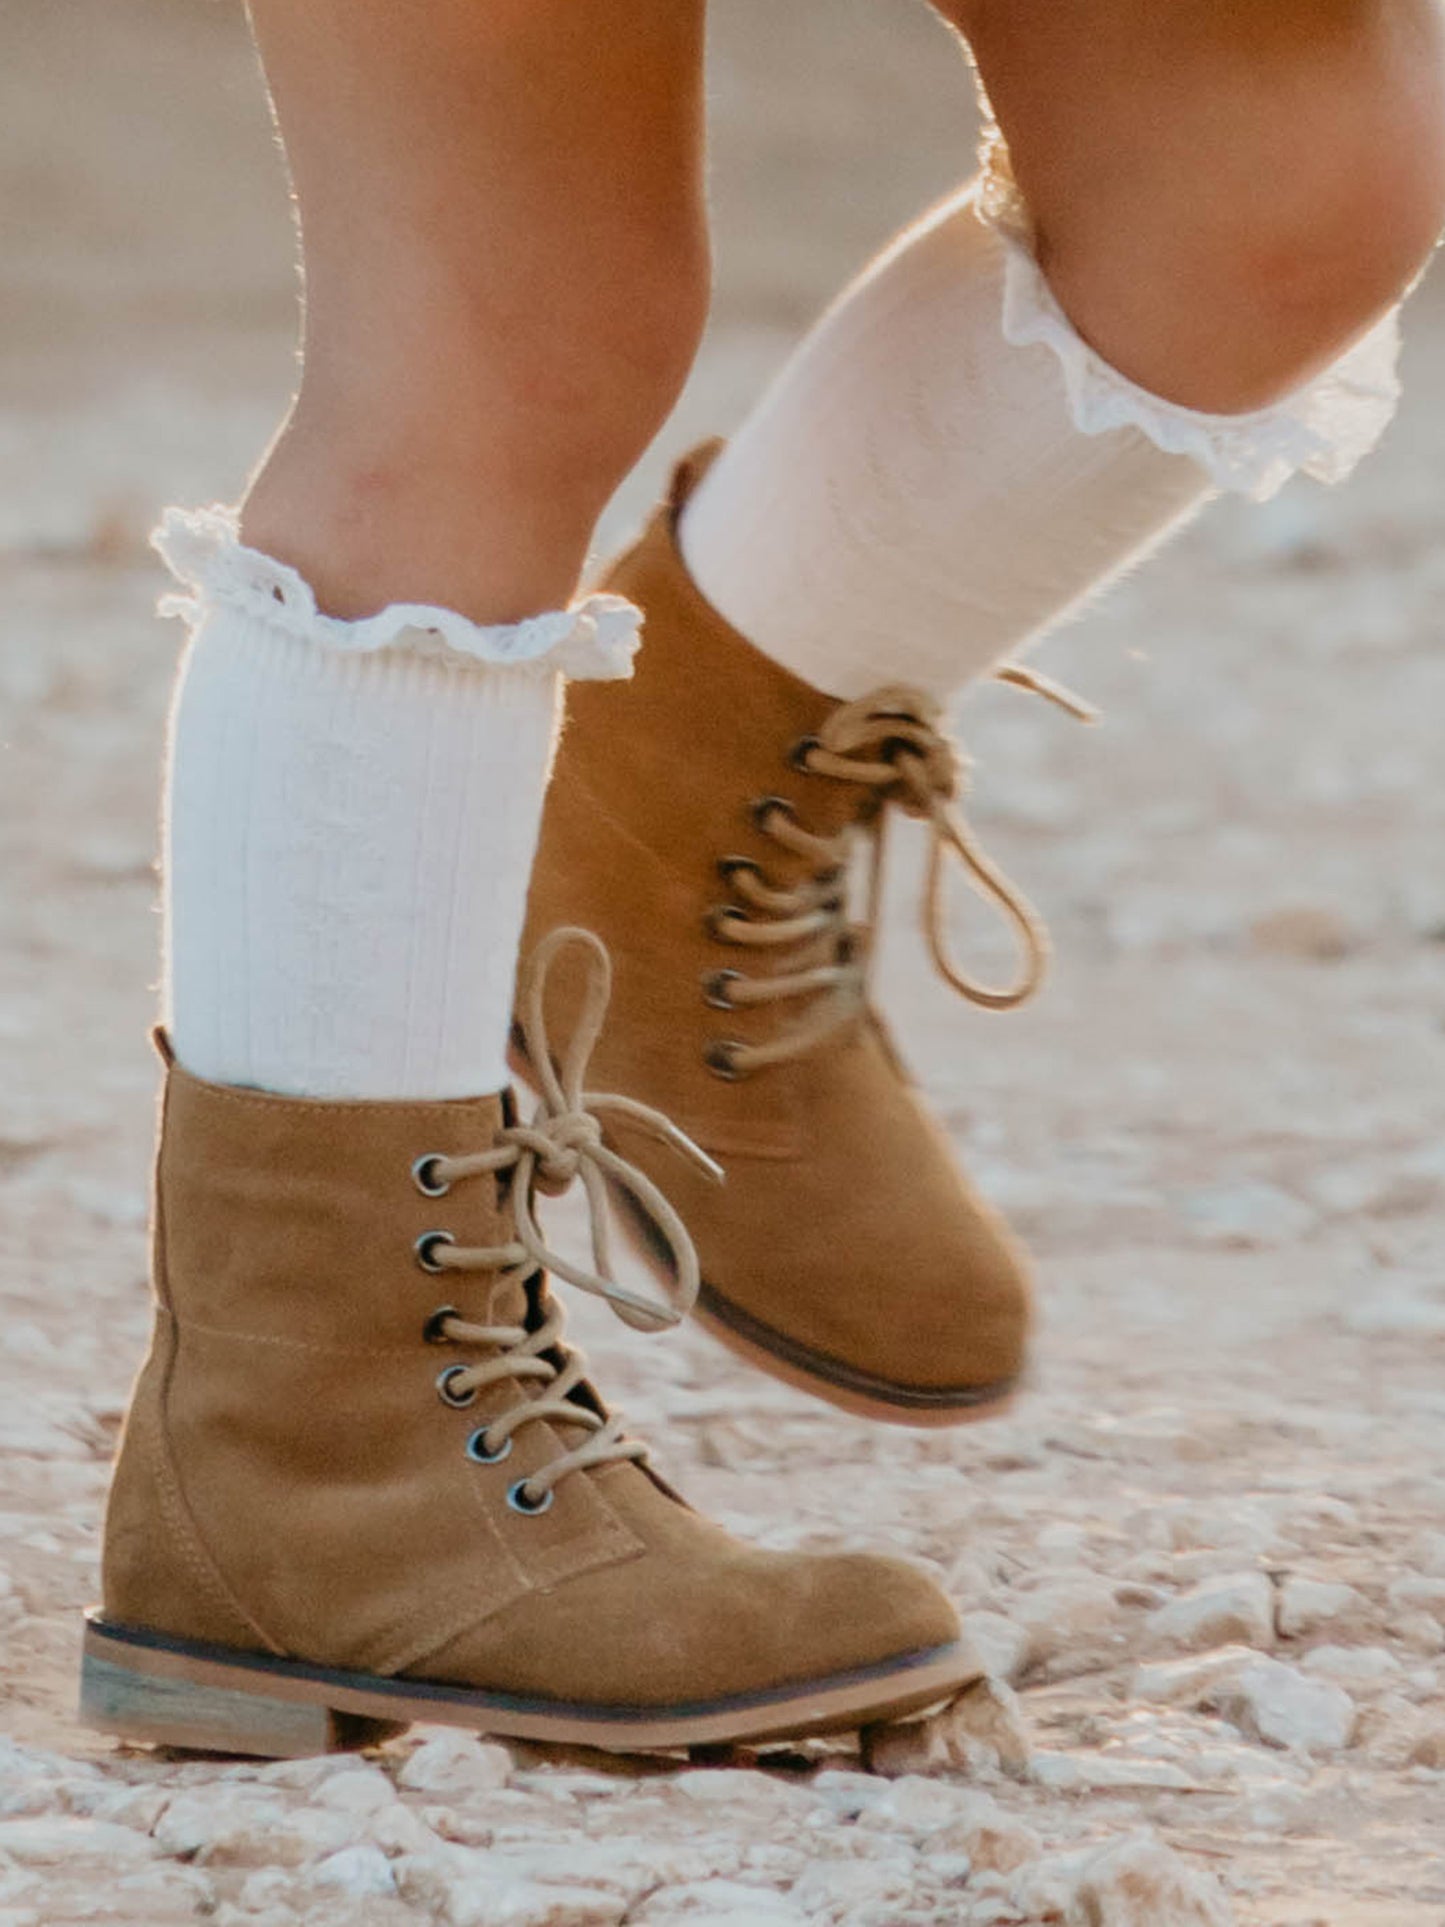 Sharp Boots. This camel suede lace-up boot has a rubber sole, metal eyelets, and nice thick laces. With a design that supports the ankle, these boots are perfect for some outdoor fun.